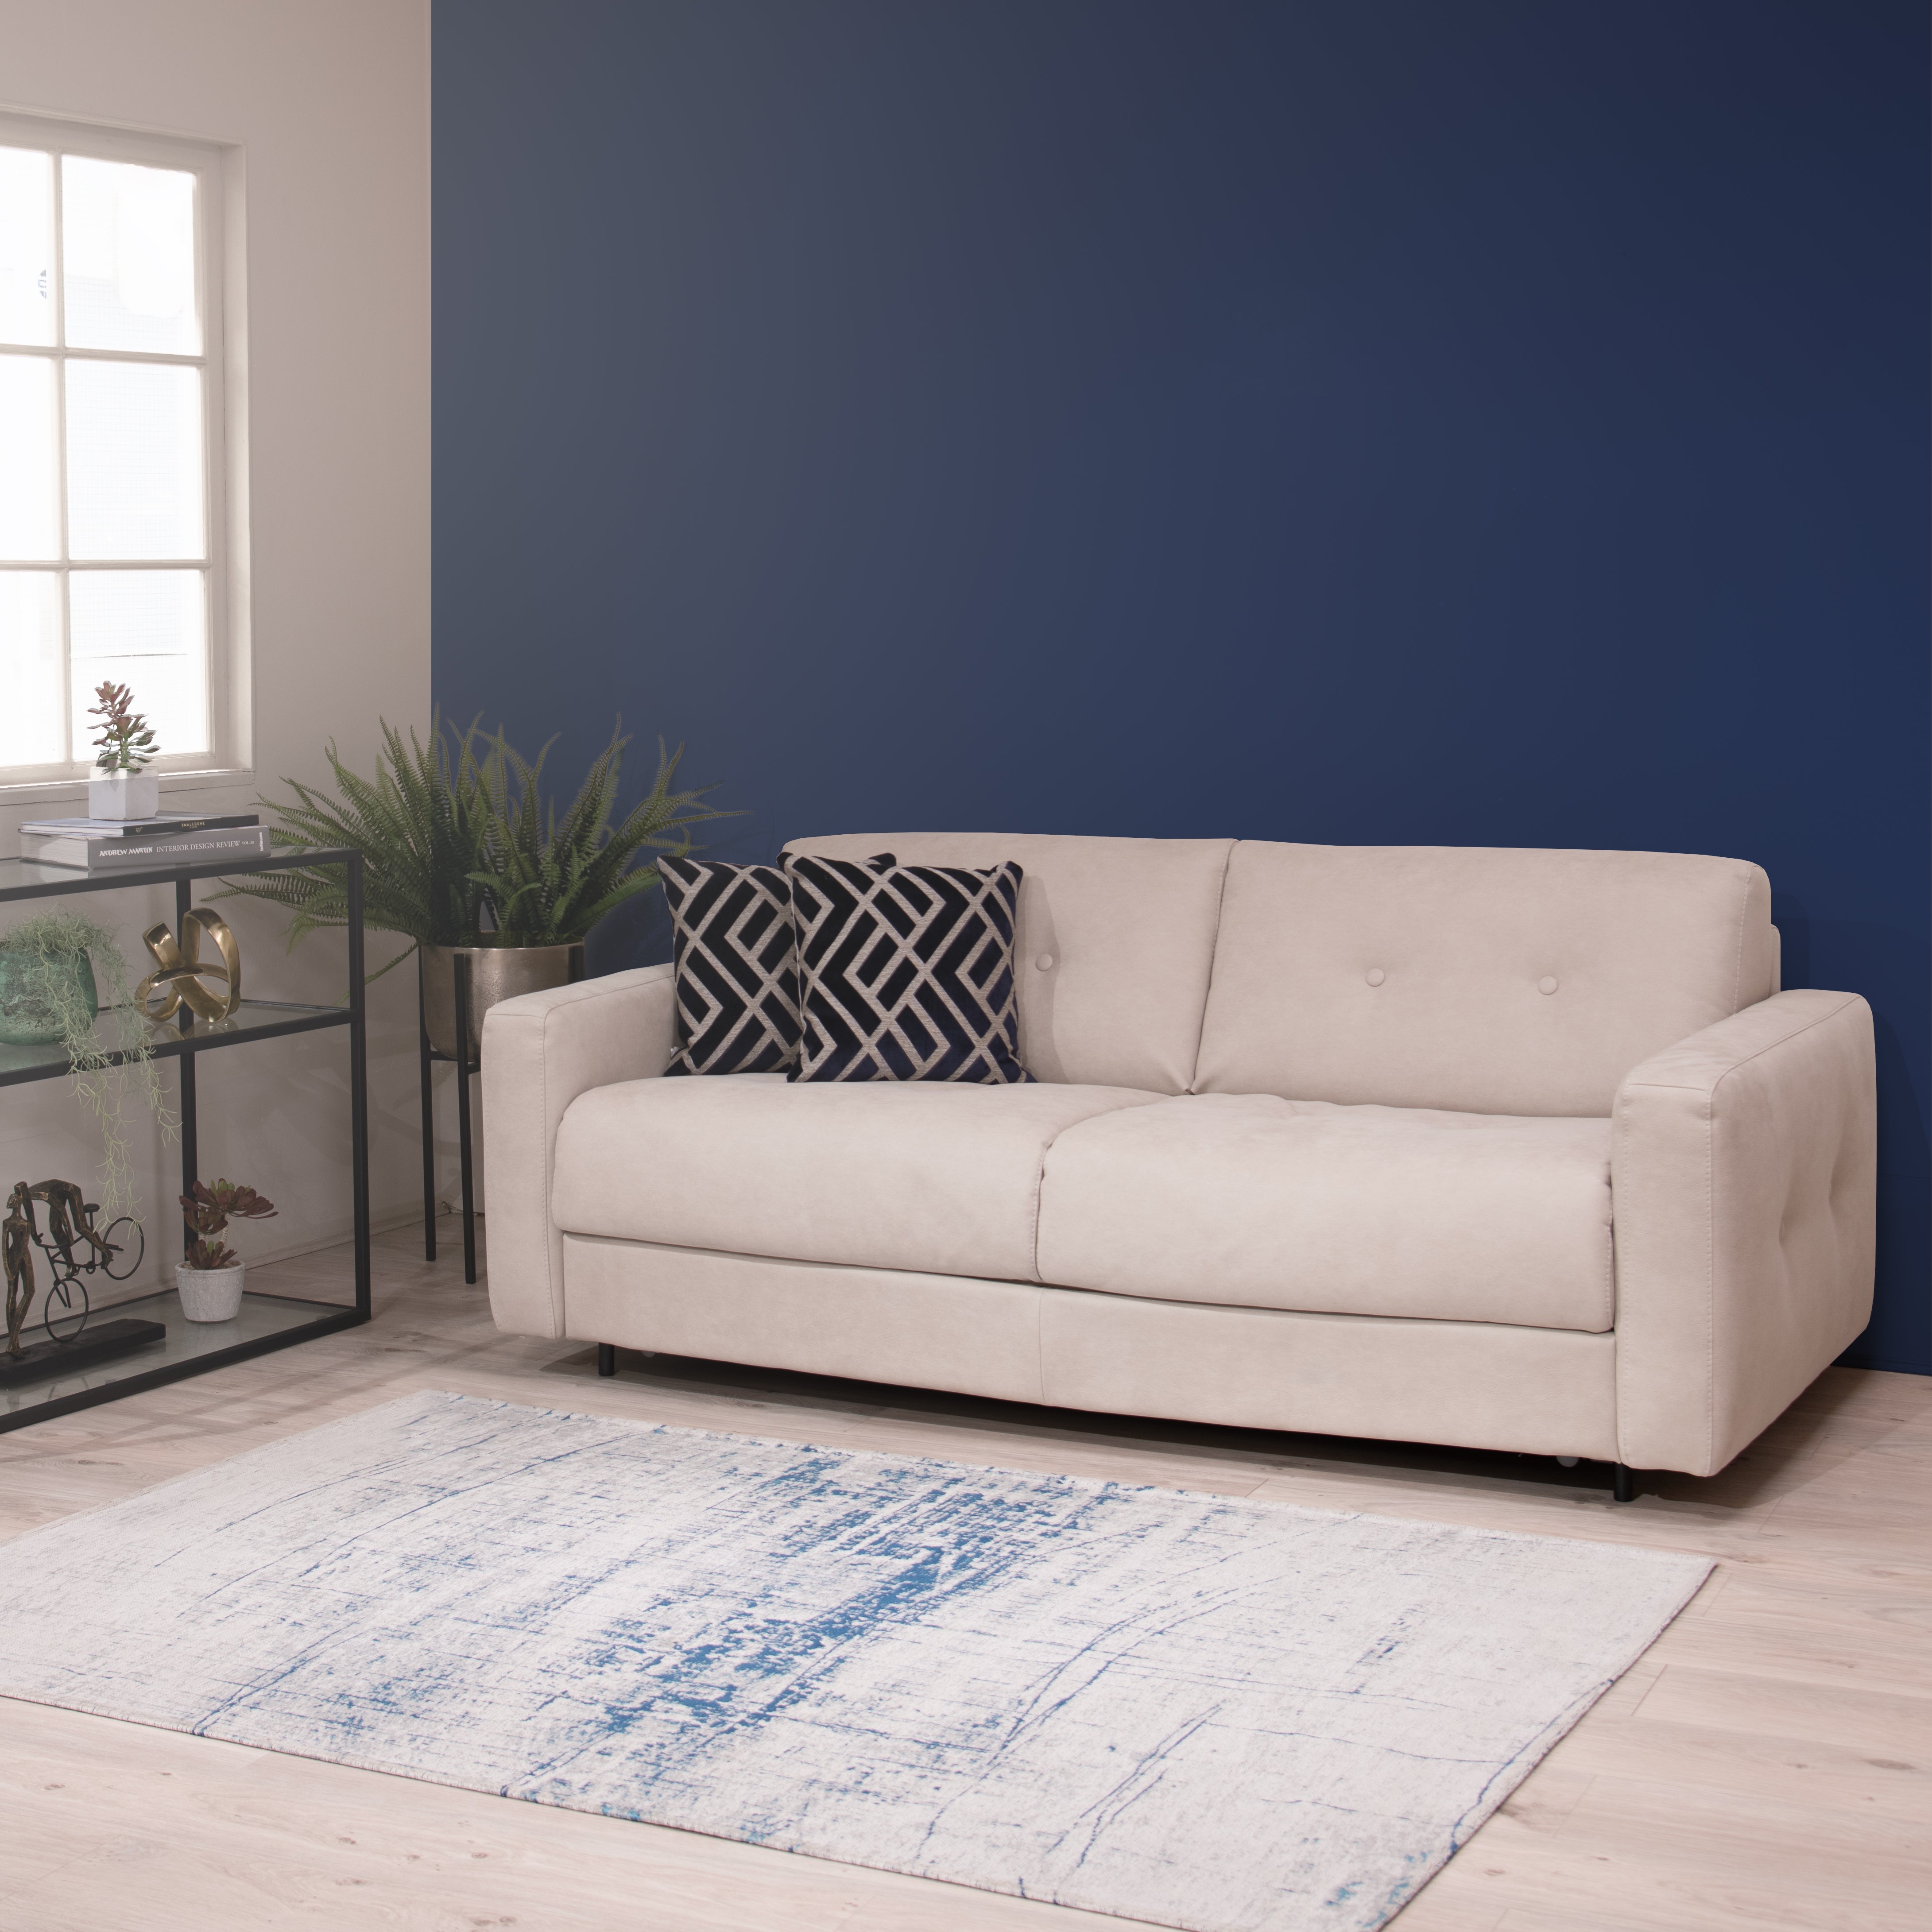 Luciano - 2 Seat Maxi Sofabed In Fabric Or Leather Microfibre